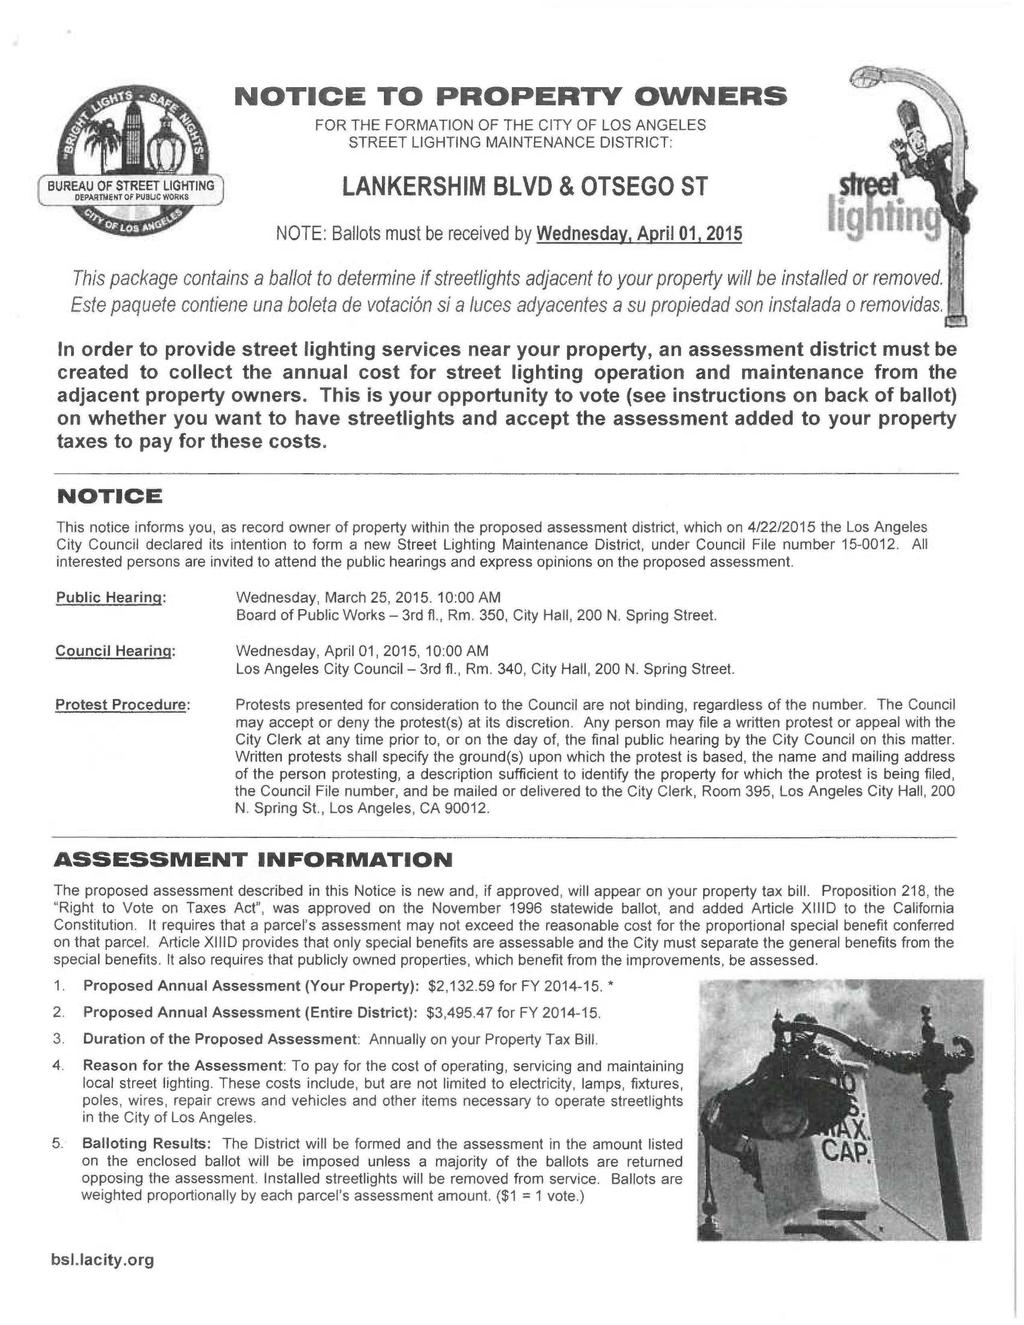 NOTICE TO PROPERTY OWNERS FOR THE FORMATION OF THE CITY OF LOS ANGELES STREET LIGHTING MAINTENANCE DISTRICT: LANKERSHIM BLVD & OTSEGO ST NOTE: Ballots must be received by Wednesday, April 01, 2015